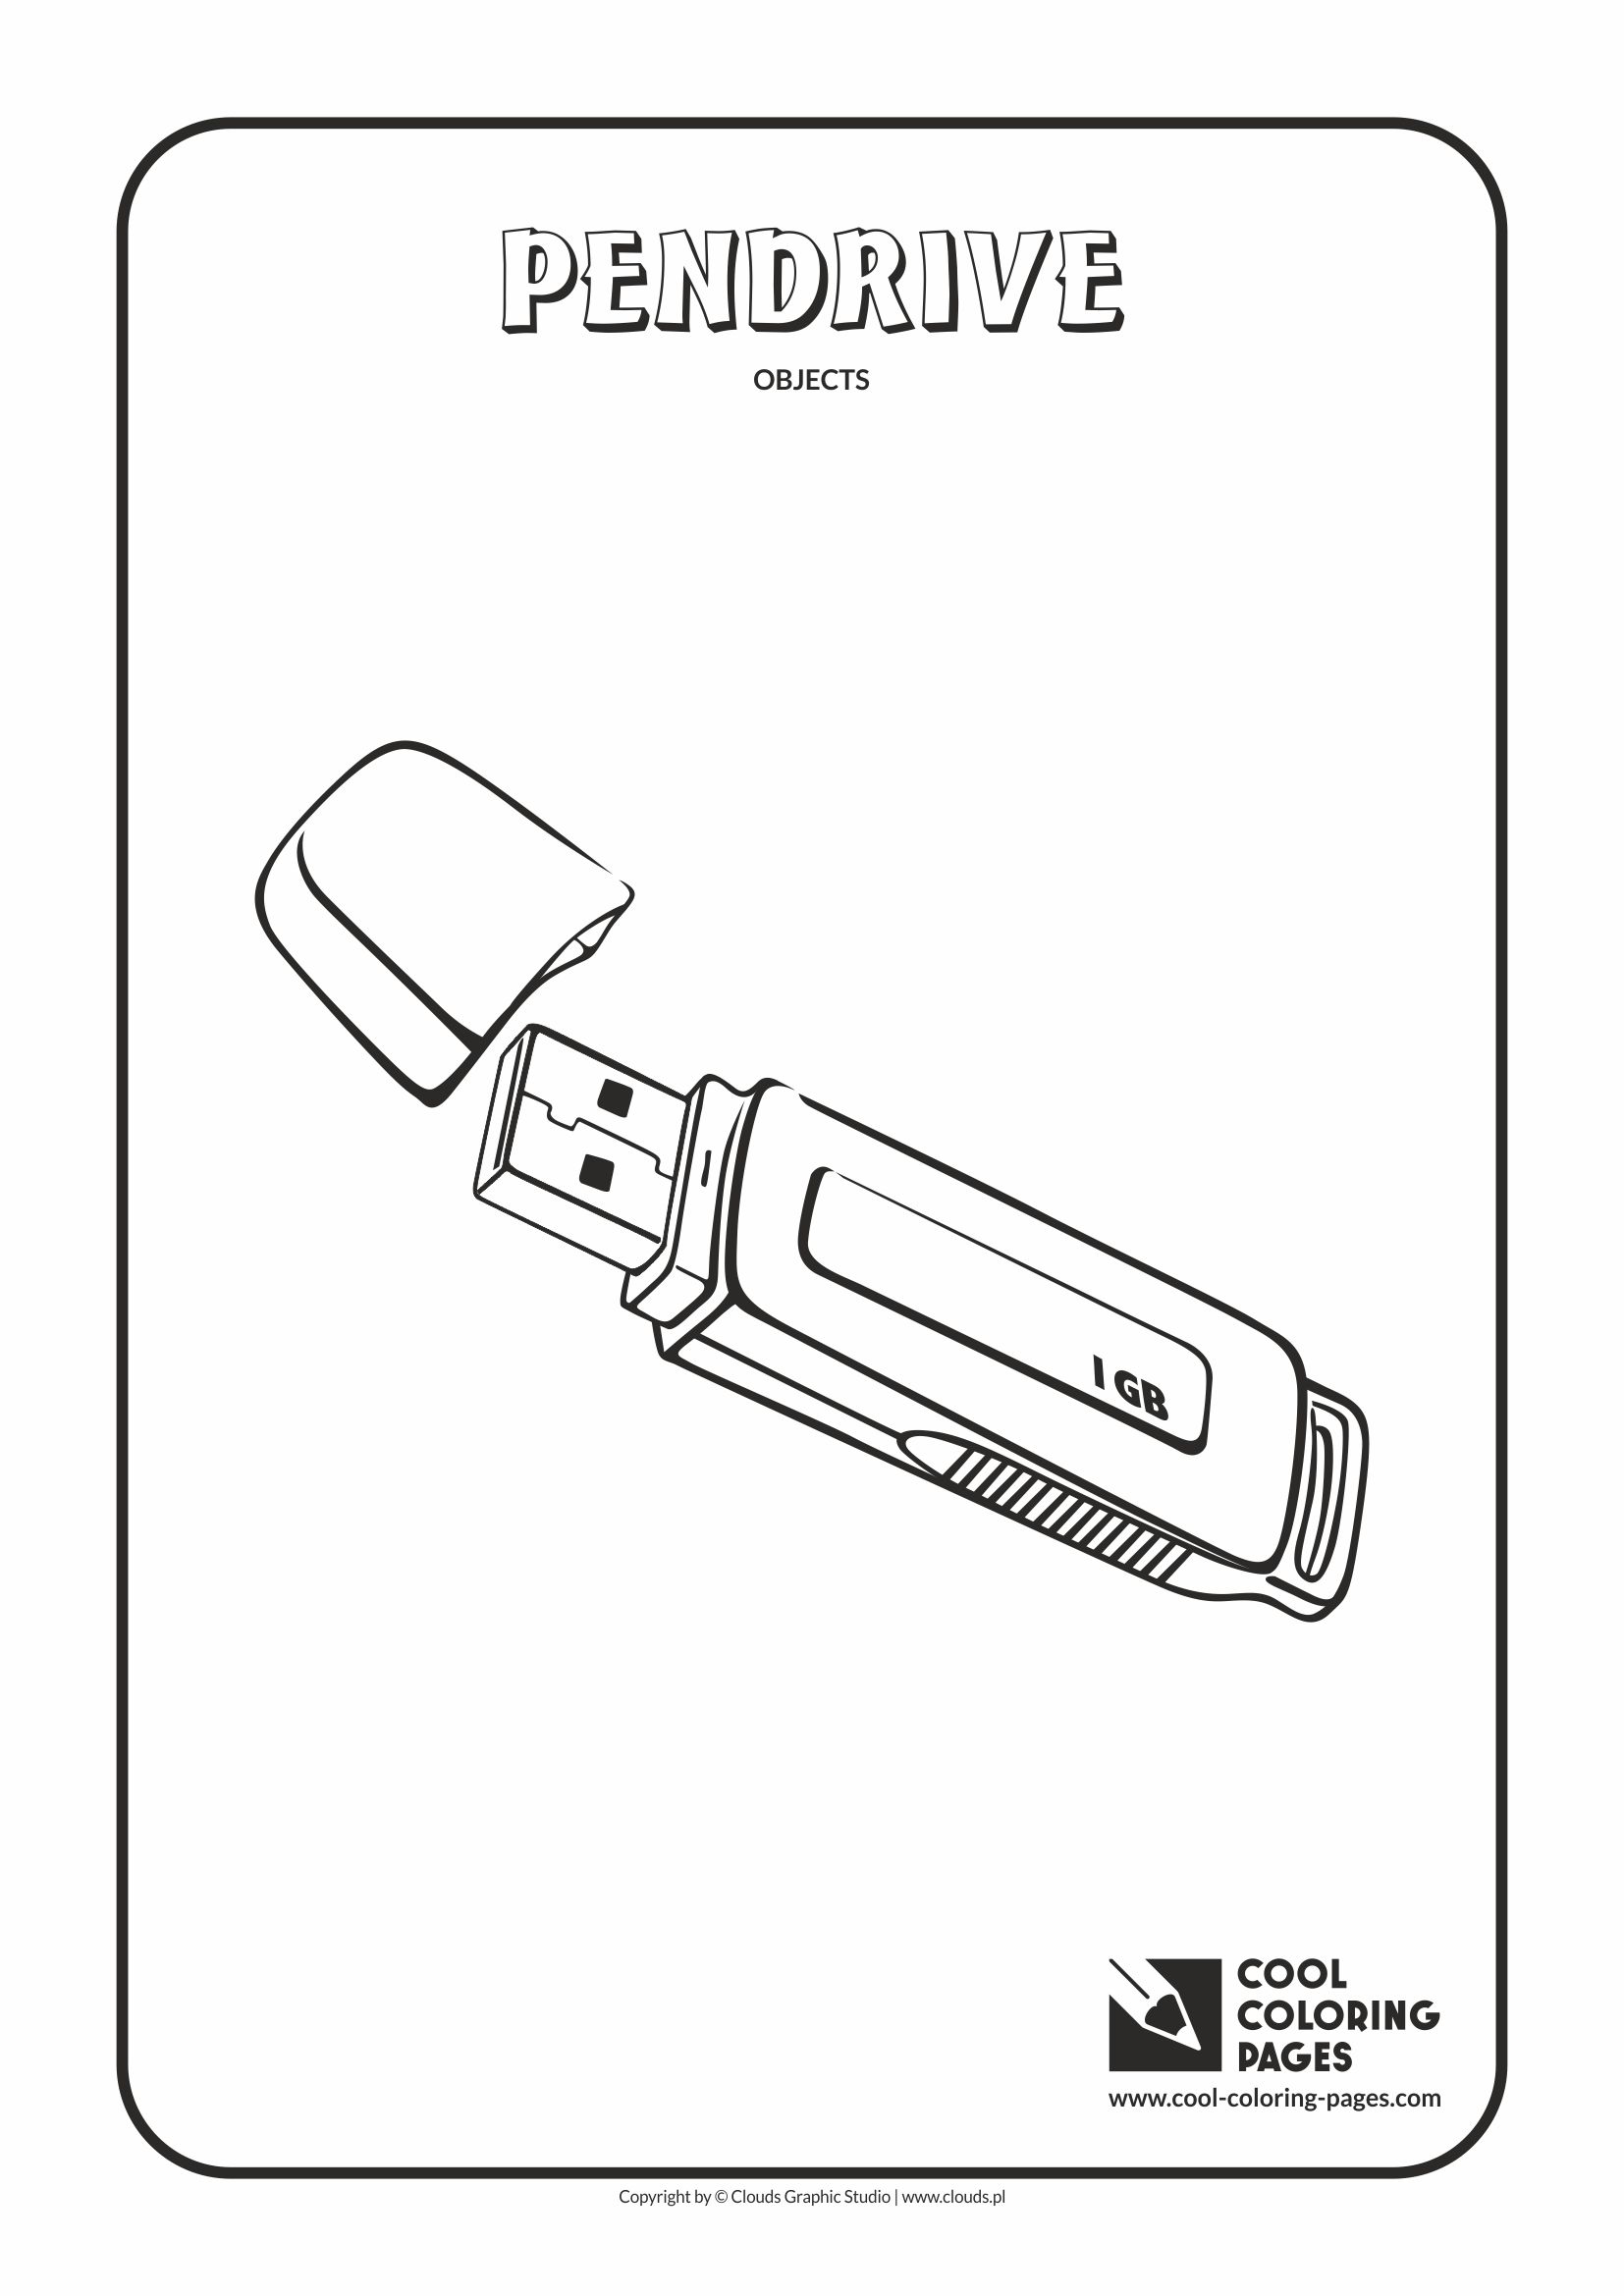 Cool Coloring Pages - Coloring objects / Pendrive